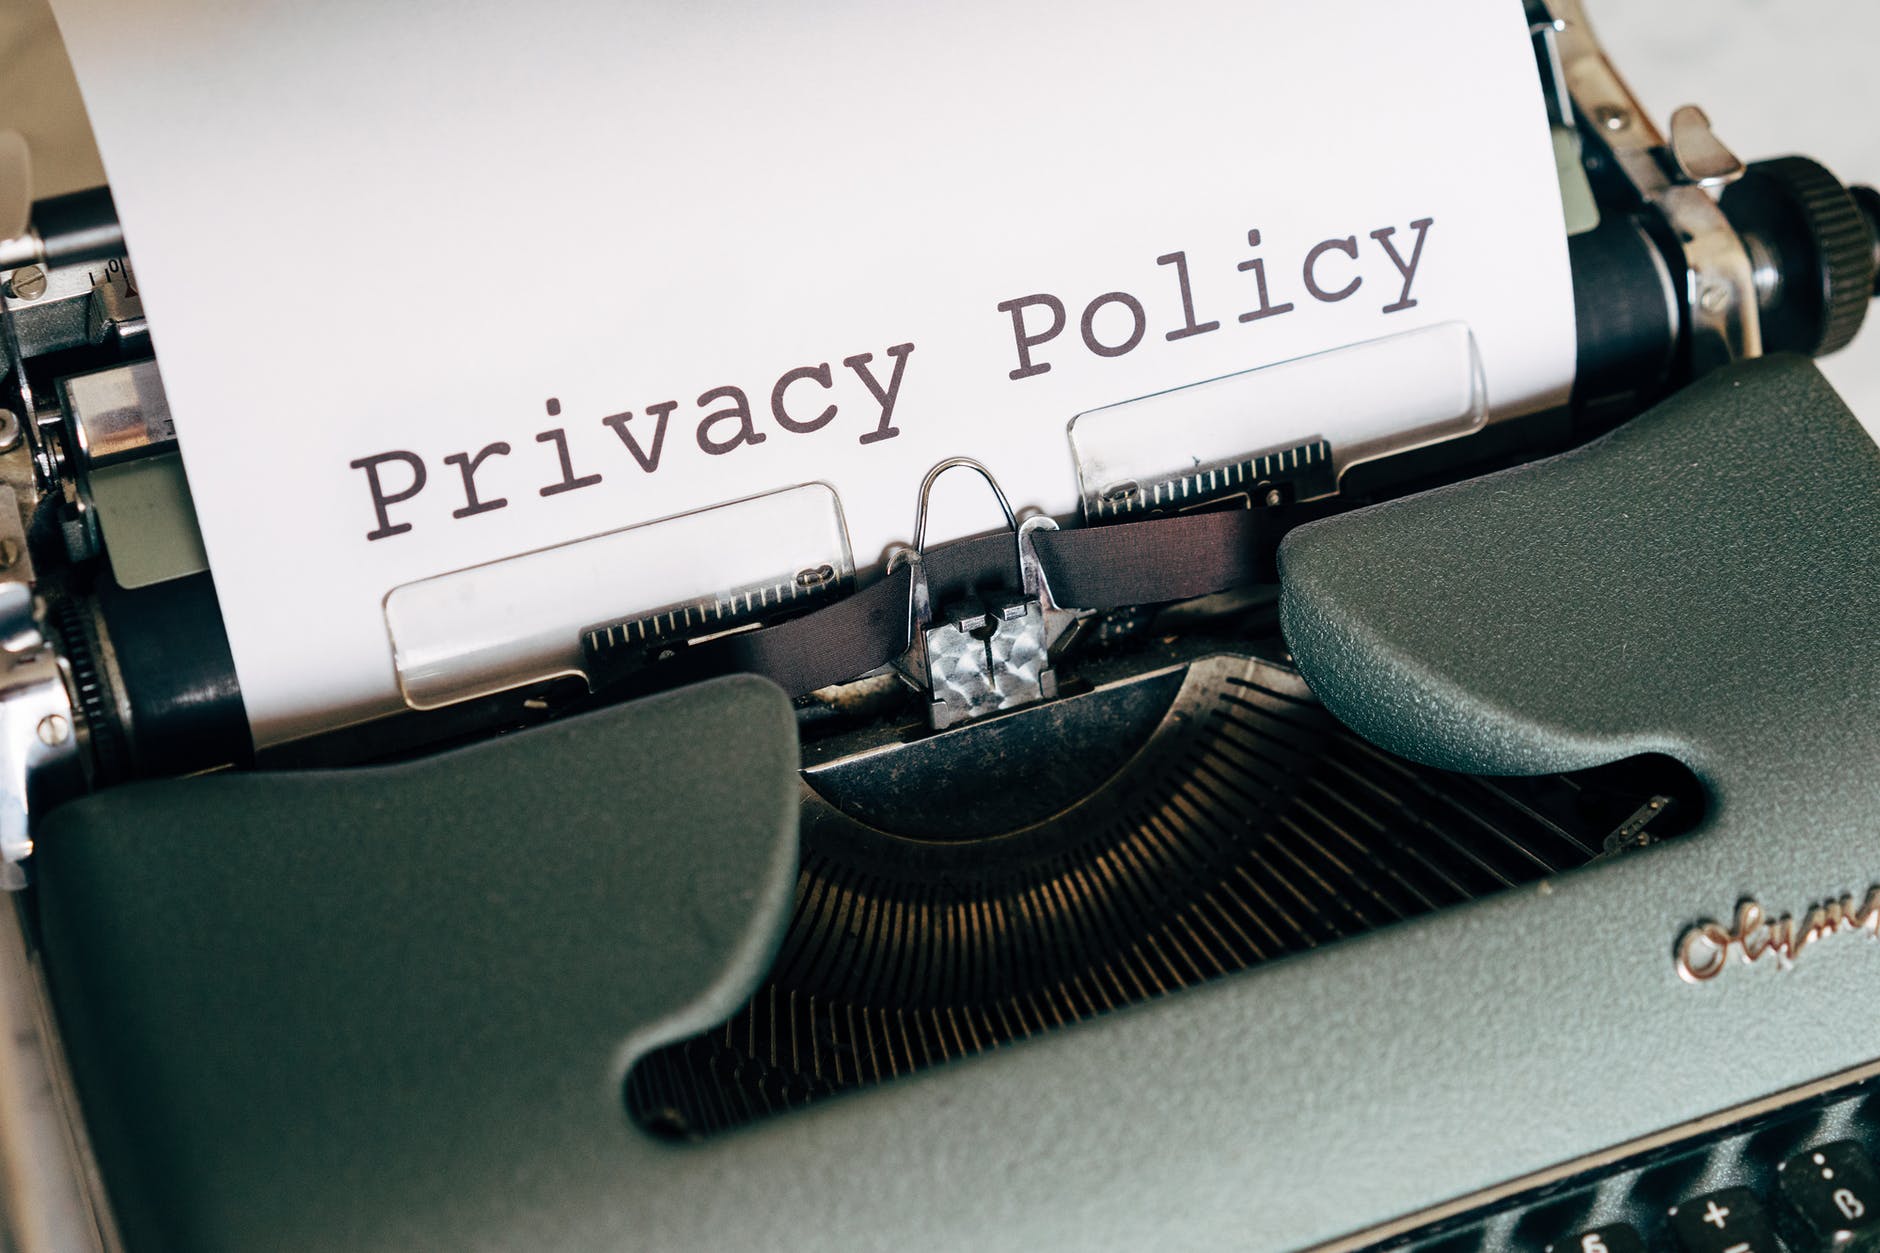 malayvc privacy policy